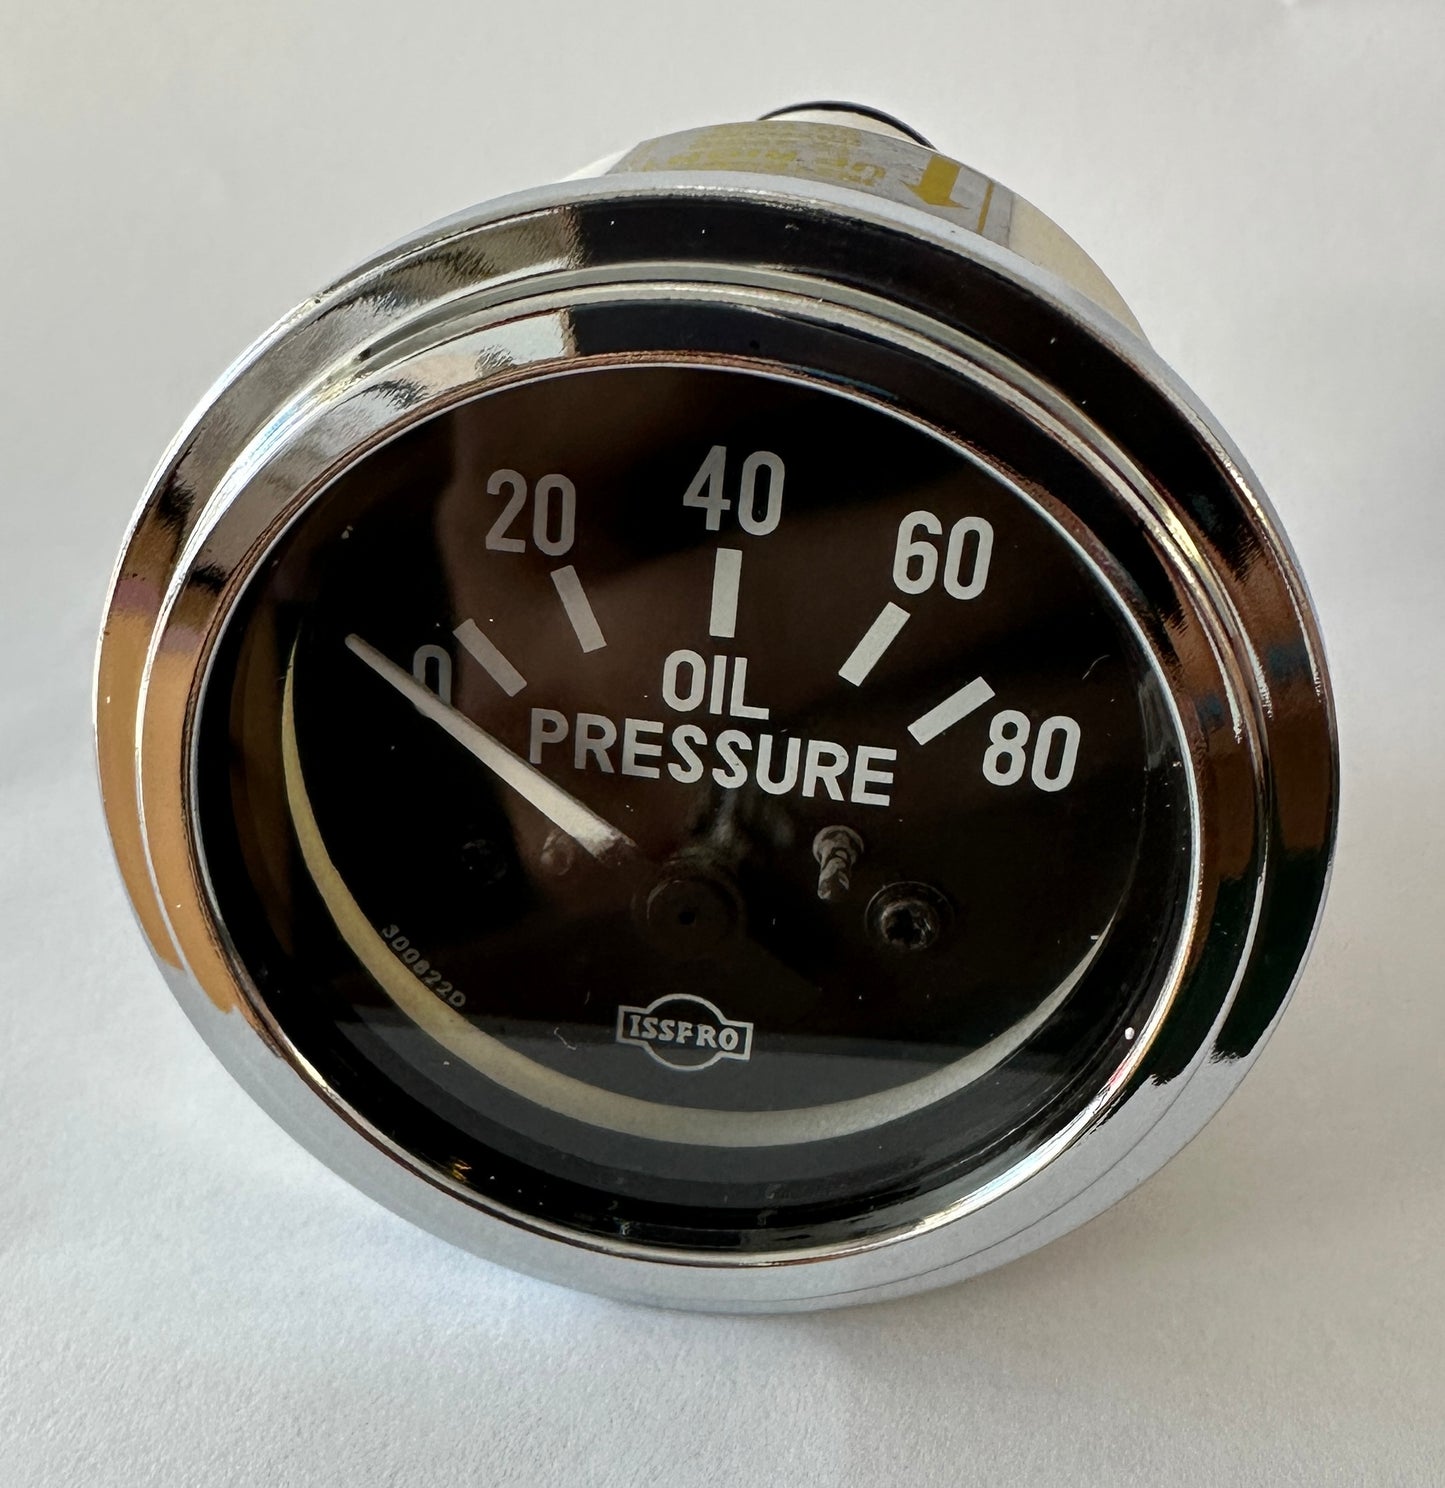 Oil Pressure Gauge Electric  80psi   [ISSPRO] [R8720]